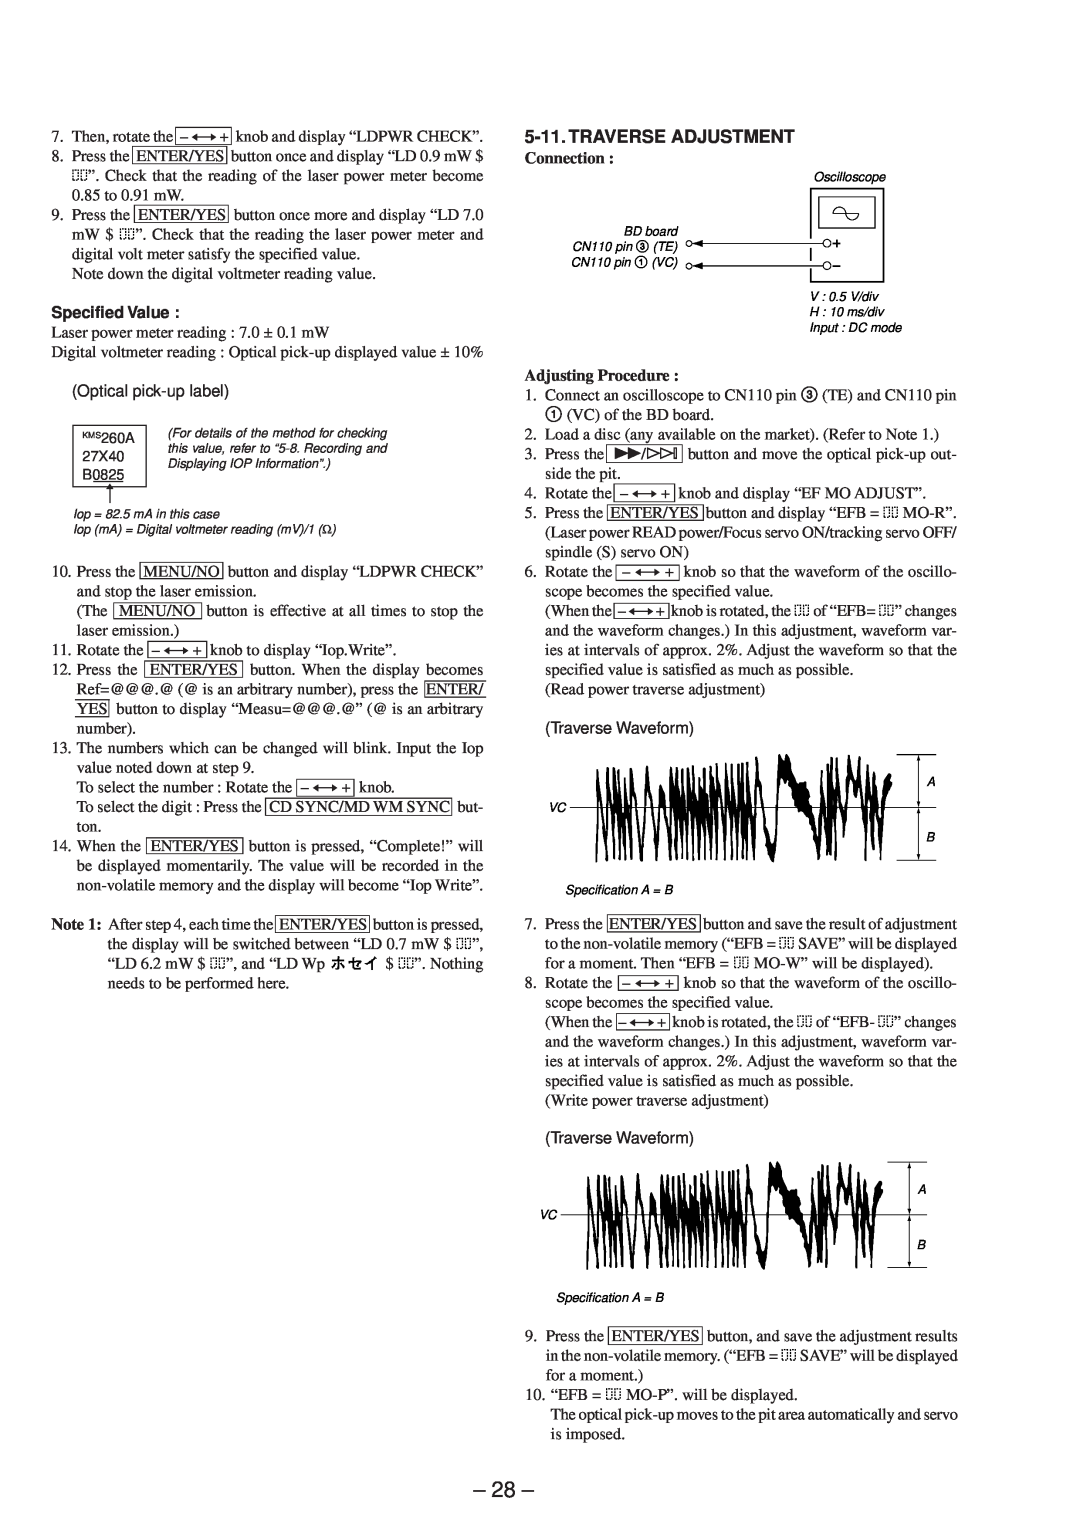 Sony MDS-SD1 service manual Traverse Adjustment, Specified Value, Connection, Adjusting Procedure 